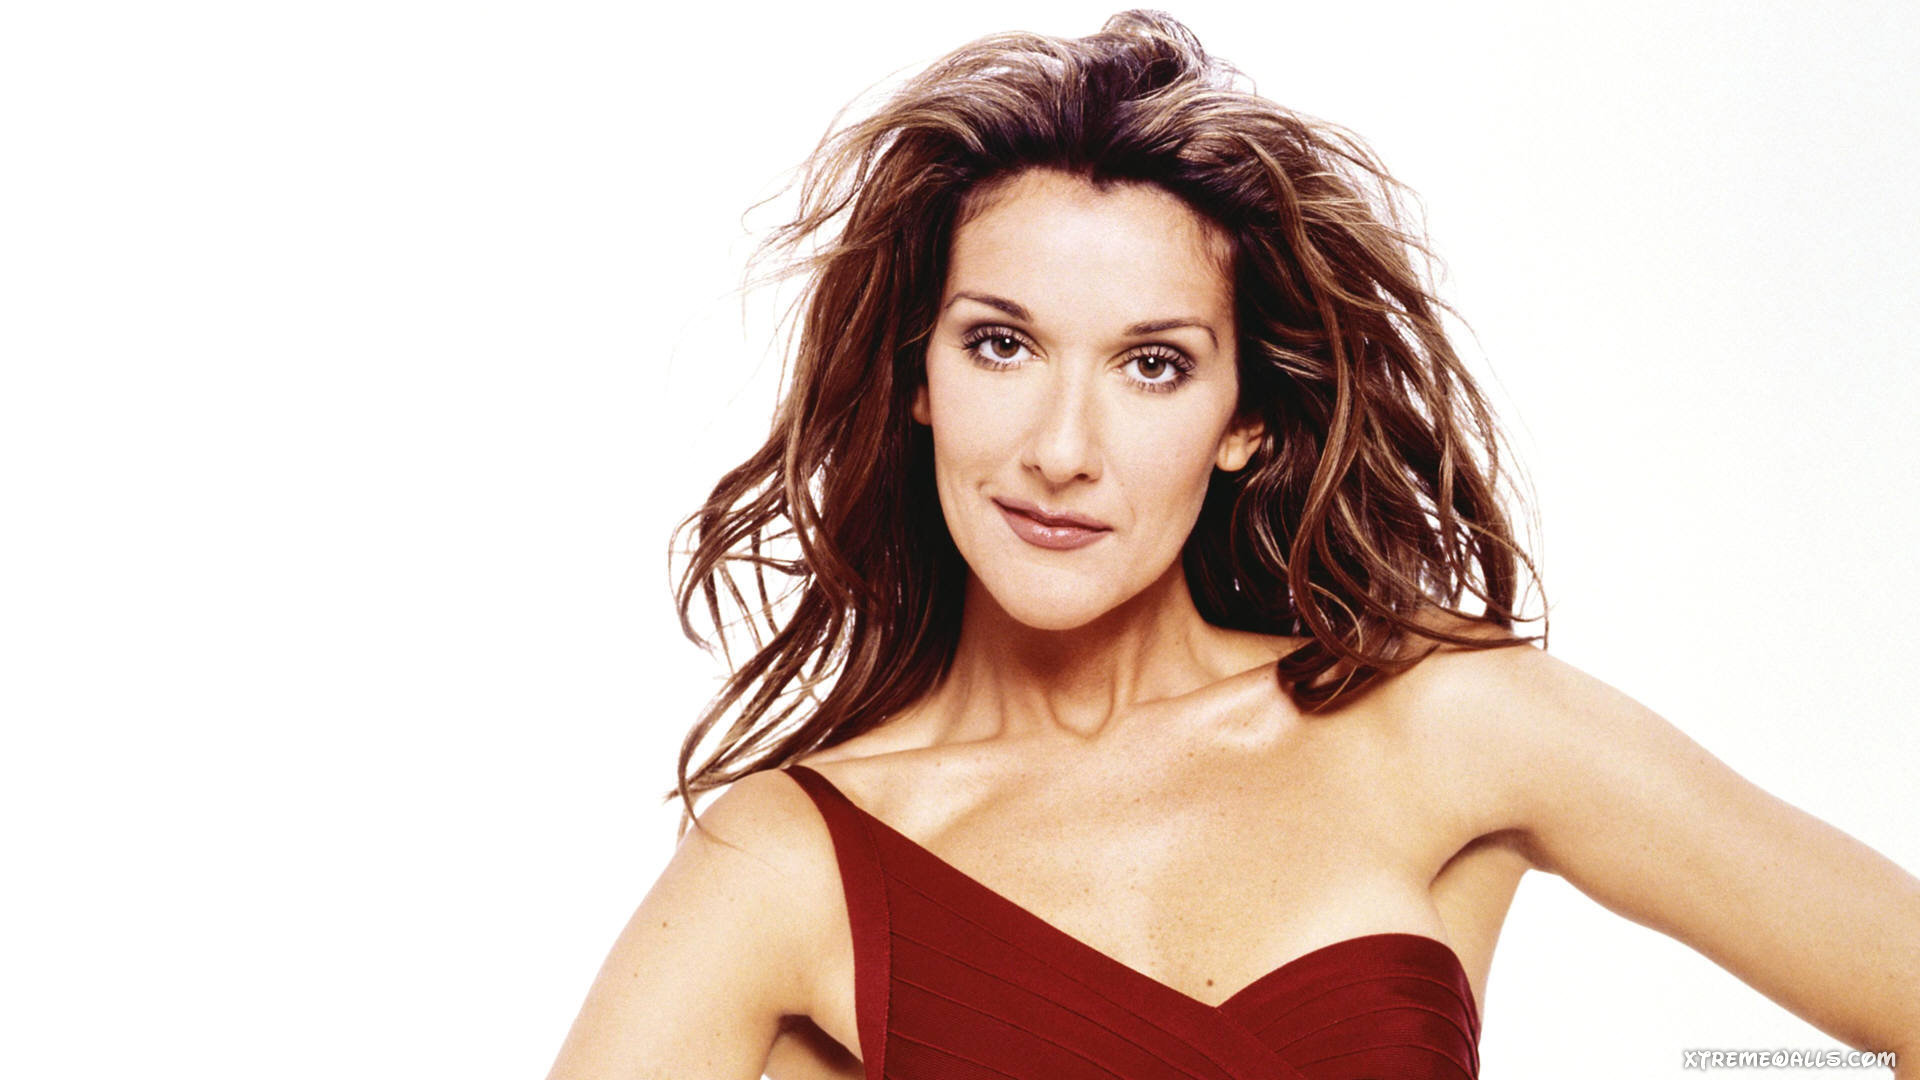 All Celine Dion wallpapers.